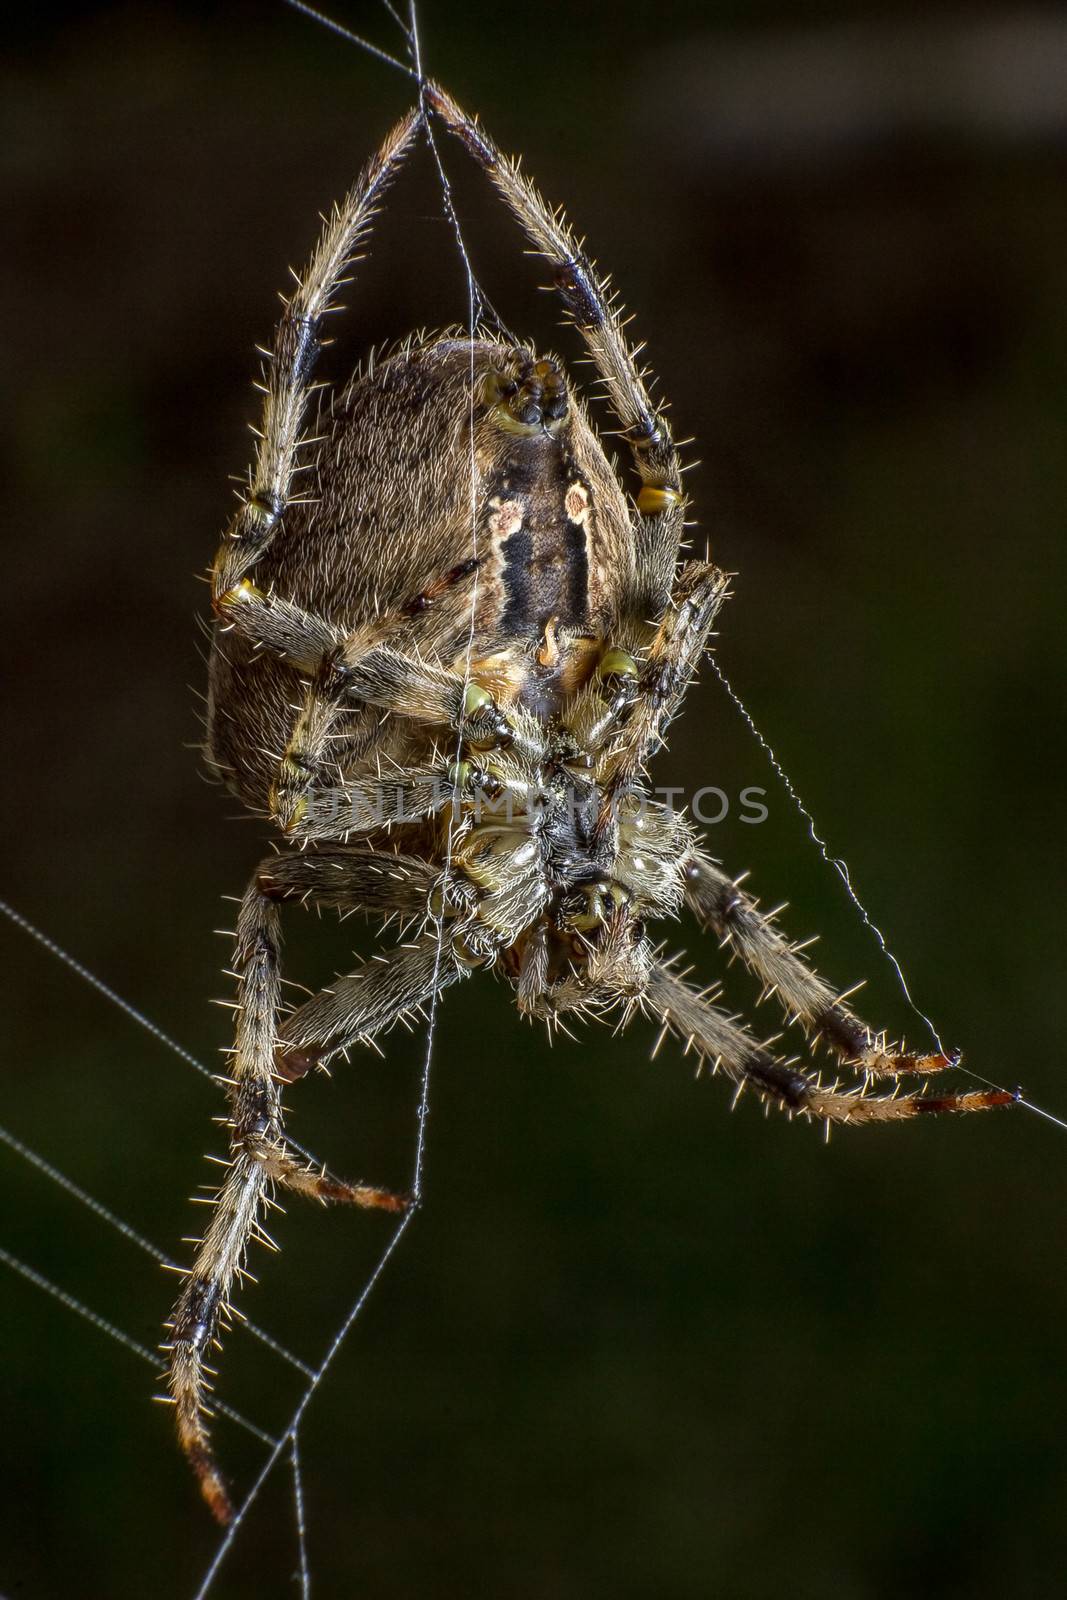 Spider staring on its web